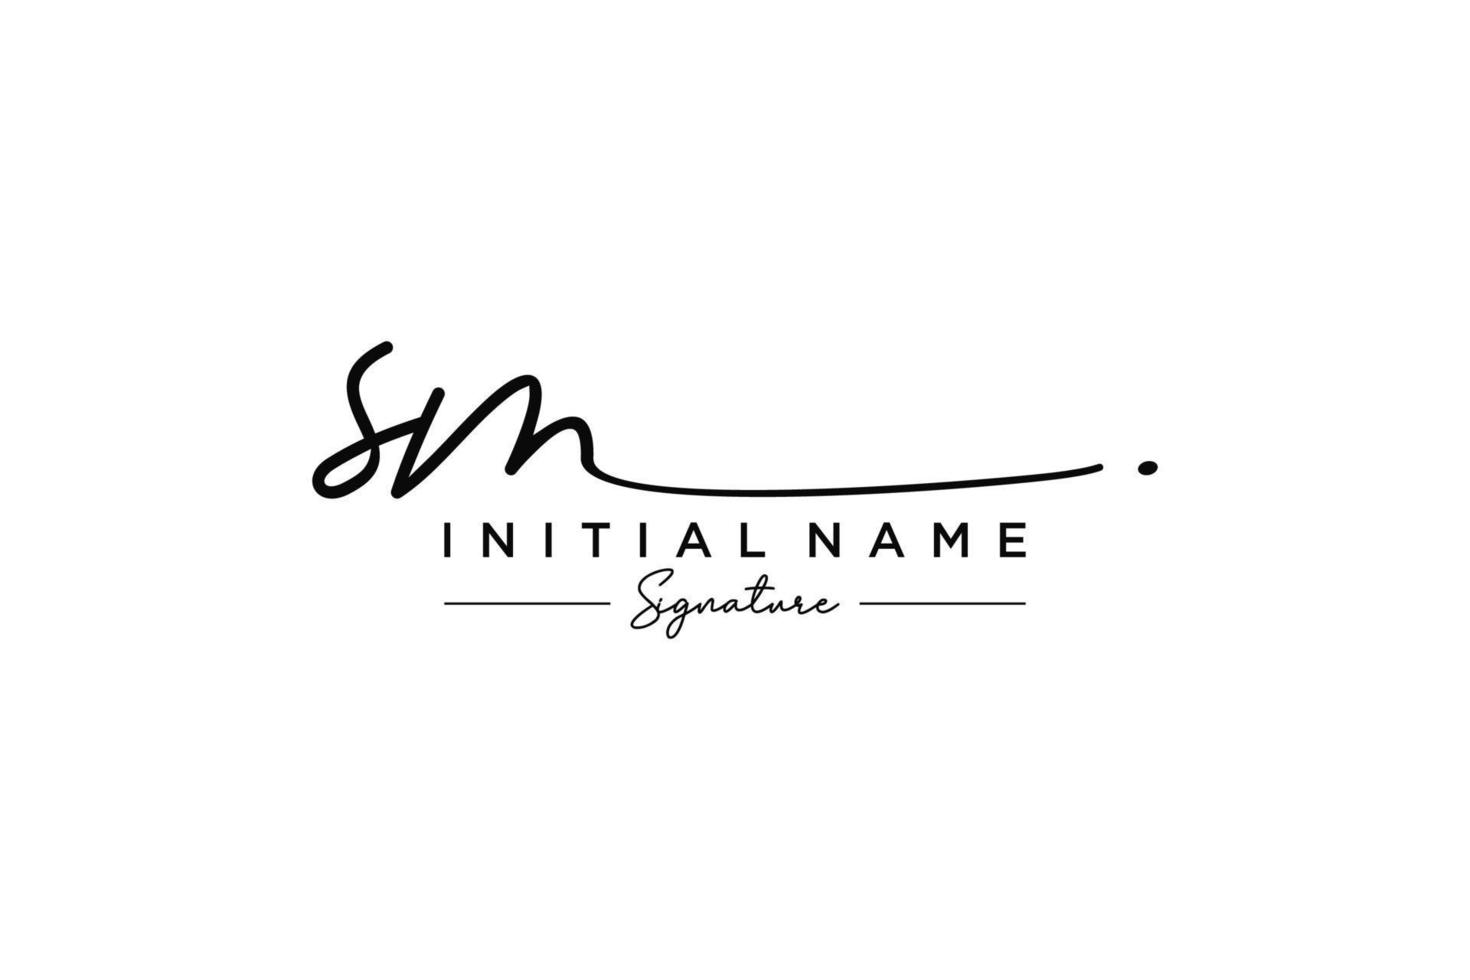 Initial SM signature logo template vector. Hand drawn Calligraphy lettering Vector illustration.